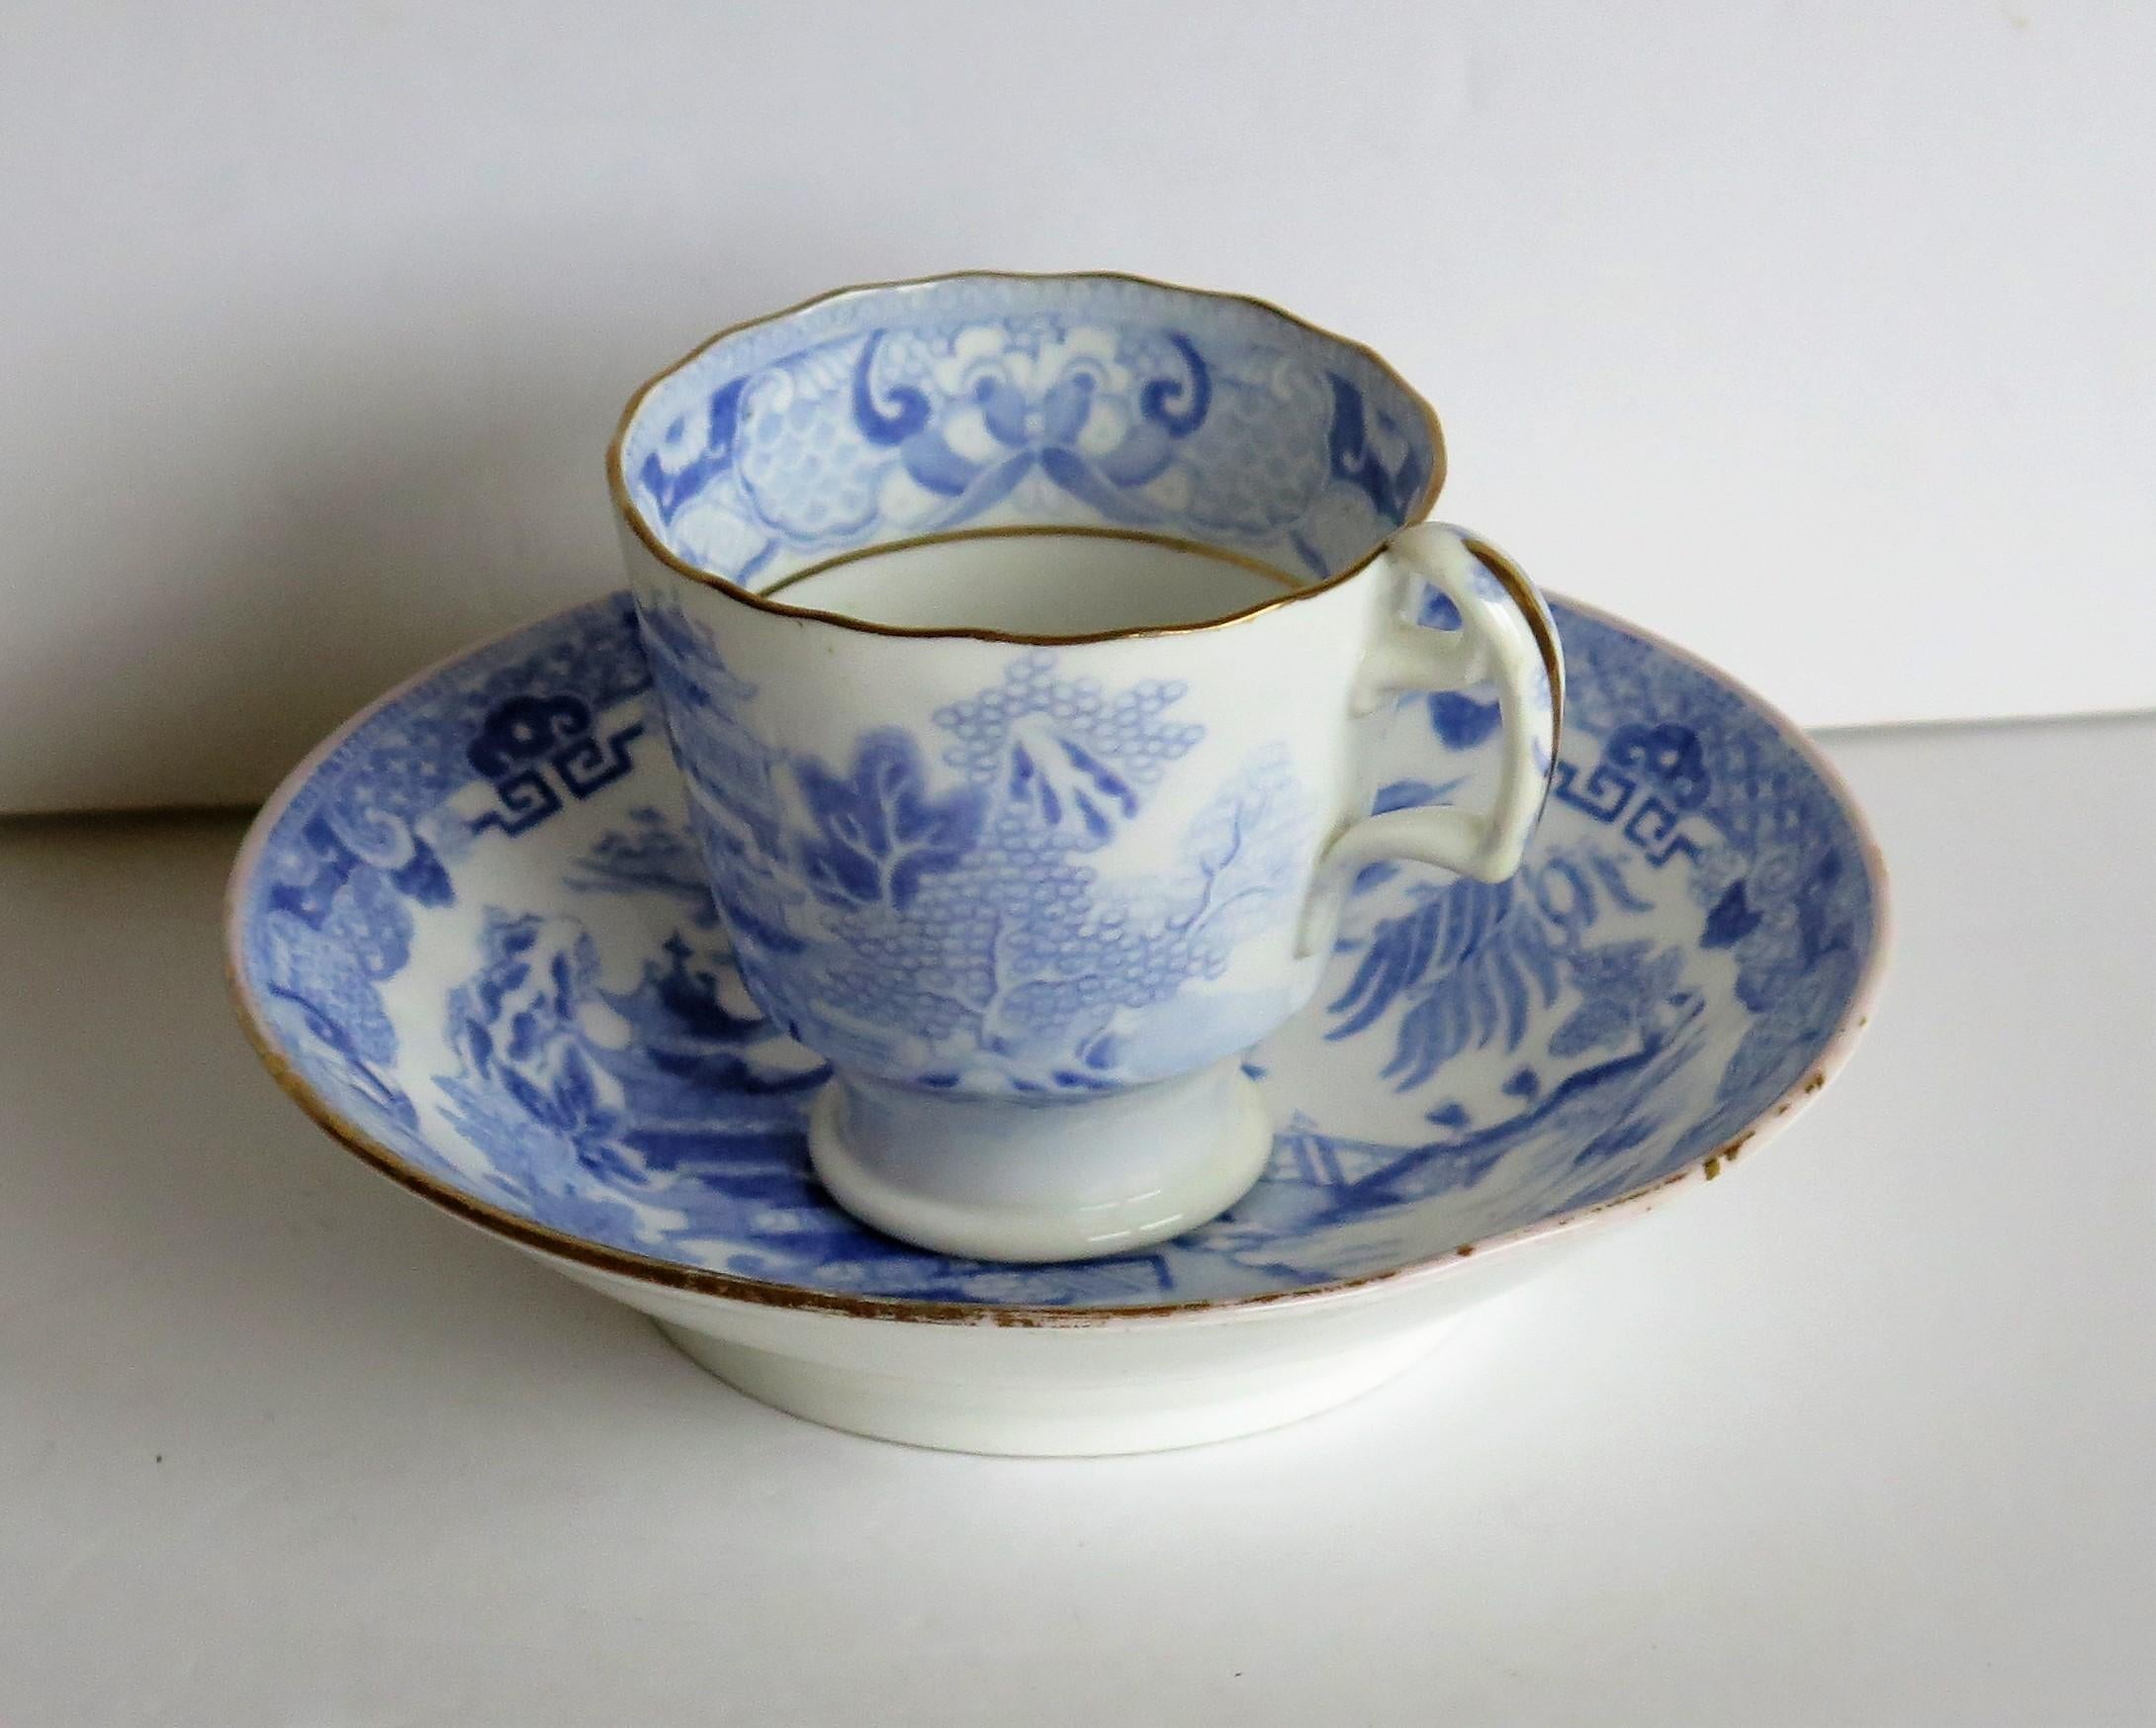 This is a porcelain blue and white, hand gilded coffee cup and saucer made by Miles Mason (Mason's), Staffordshire Potteries, in the early 19th century, circa 1812-1820.

Both pieces are well potted with the cup having the 